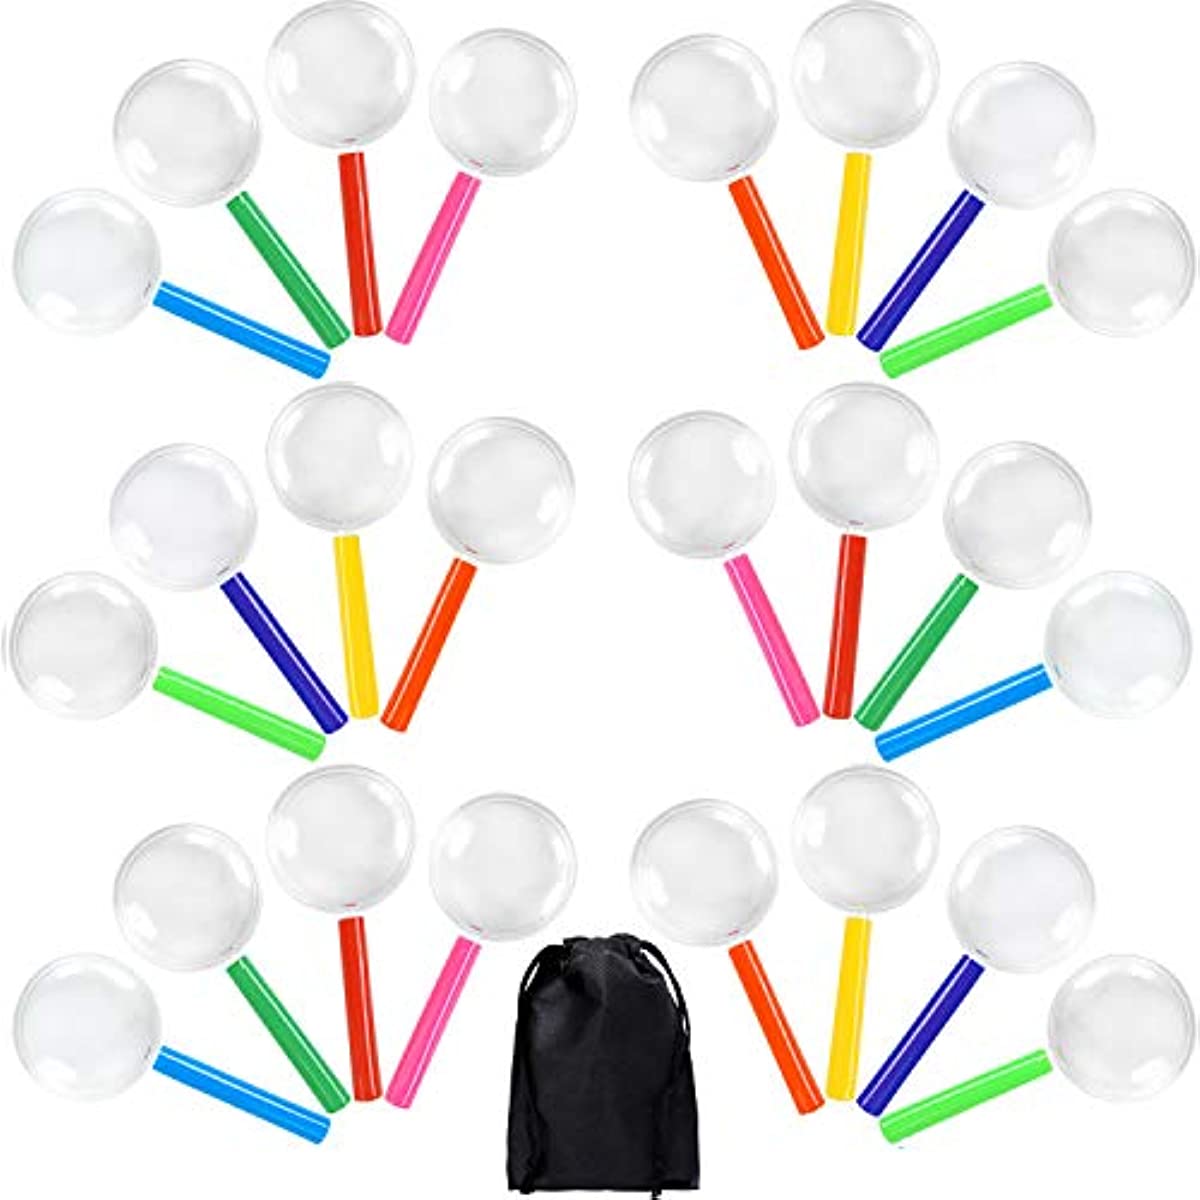 ELCOHO 24 Pack Magnifying Glasses for Young People Plastic Colorful Magnifying Glasses for Party Favors Educational Toys with Storage Bag, 8 Colors